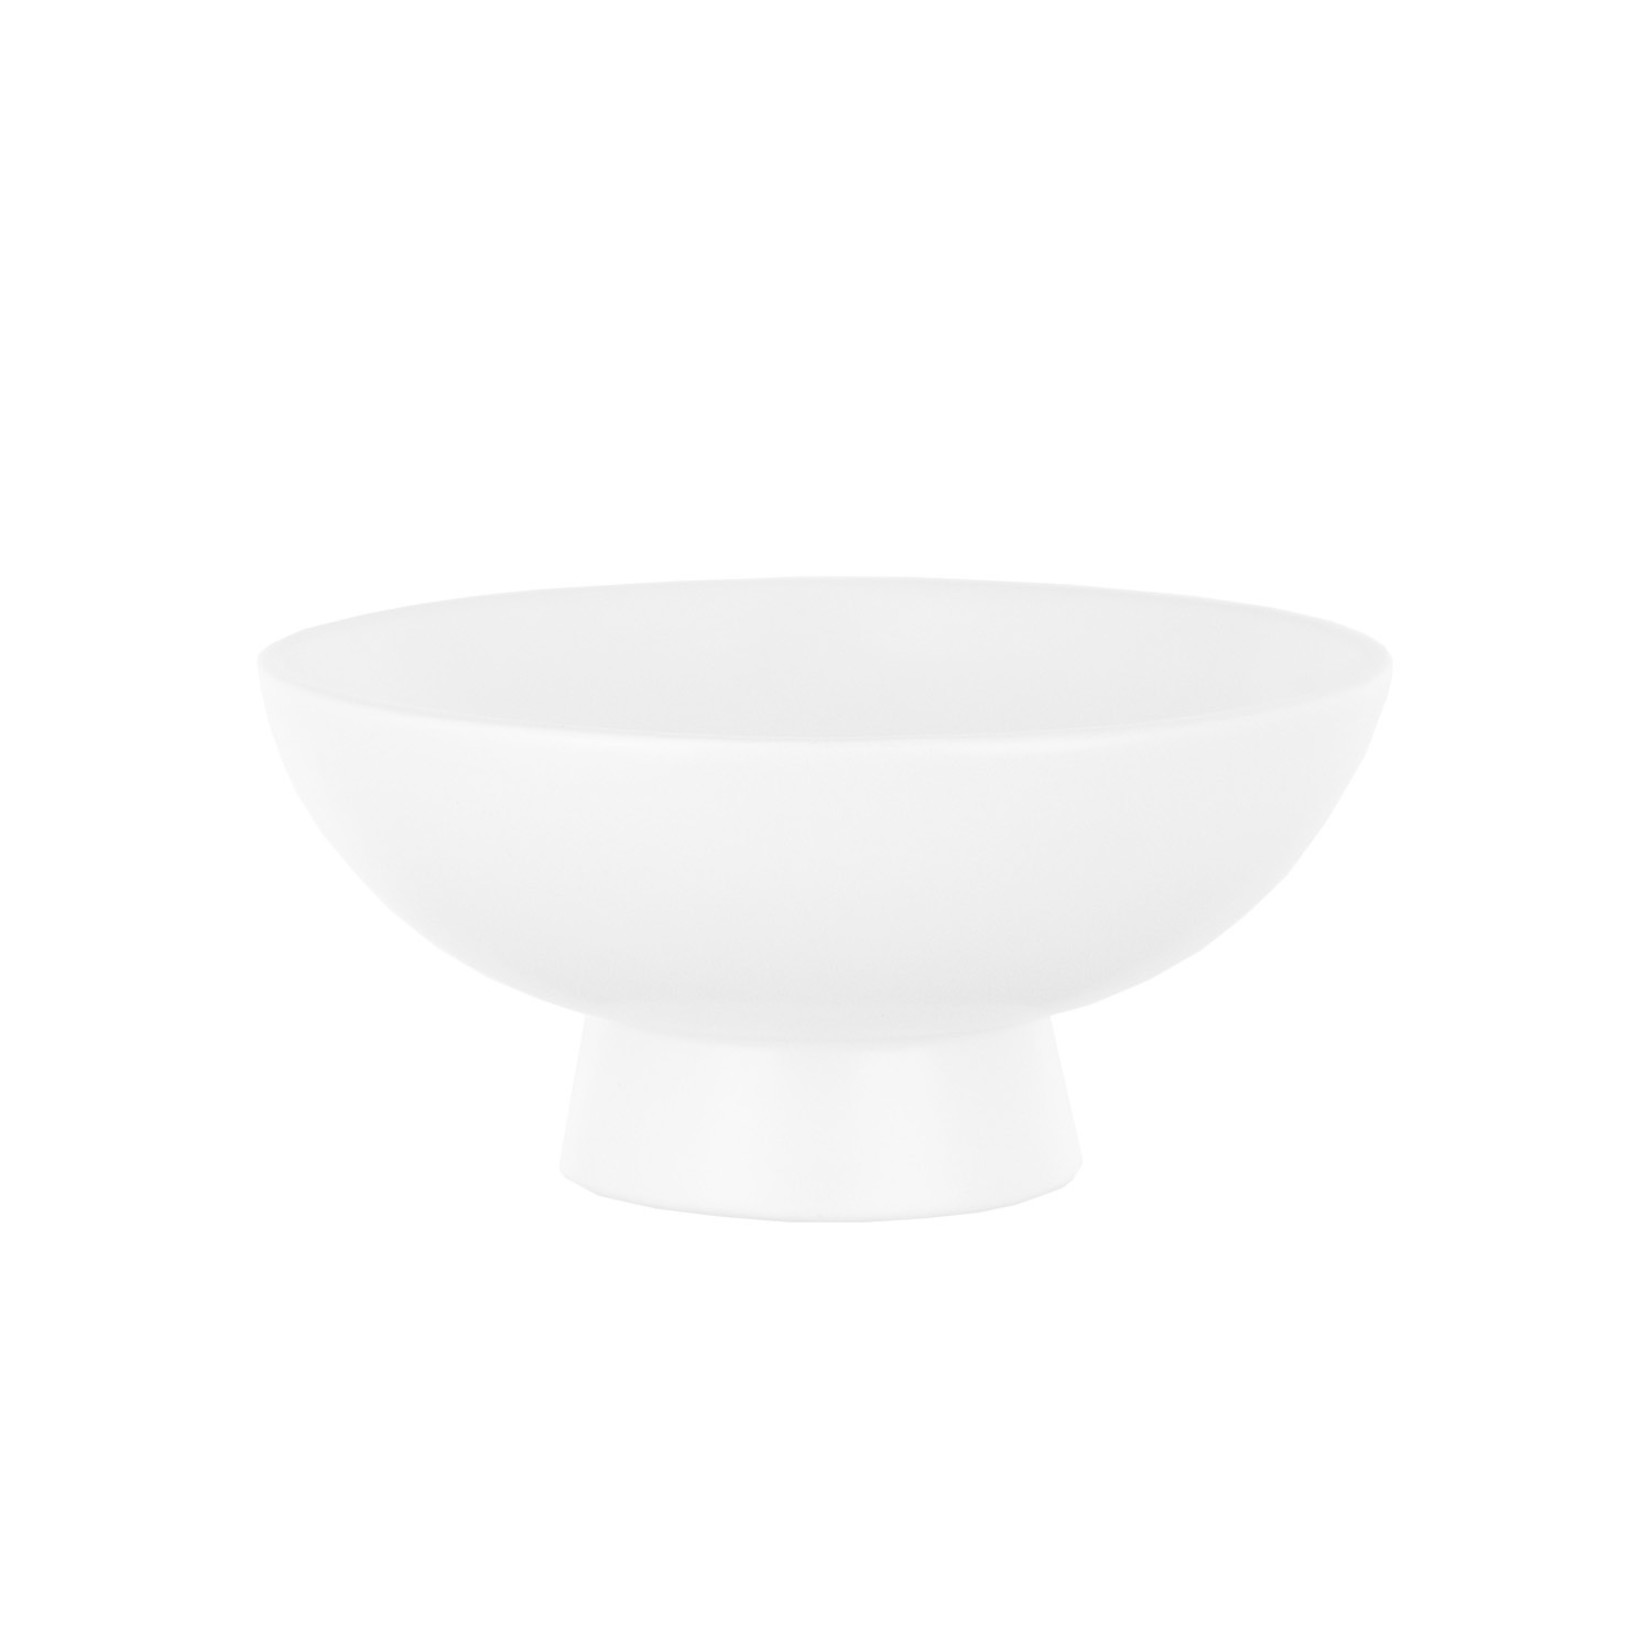 3”H X 6”D WHITE DEMI FOOTED BOWL